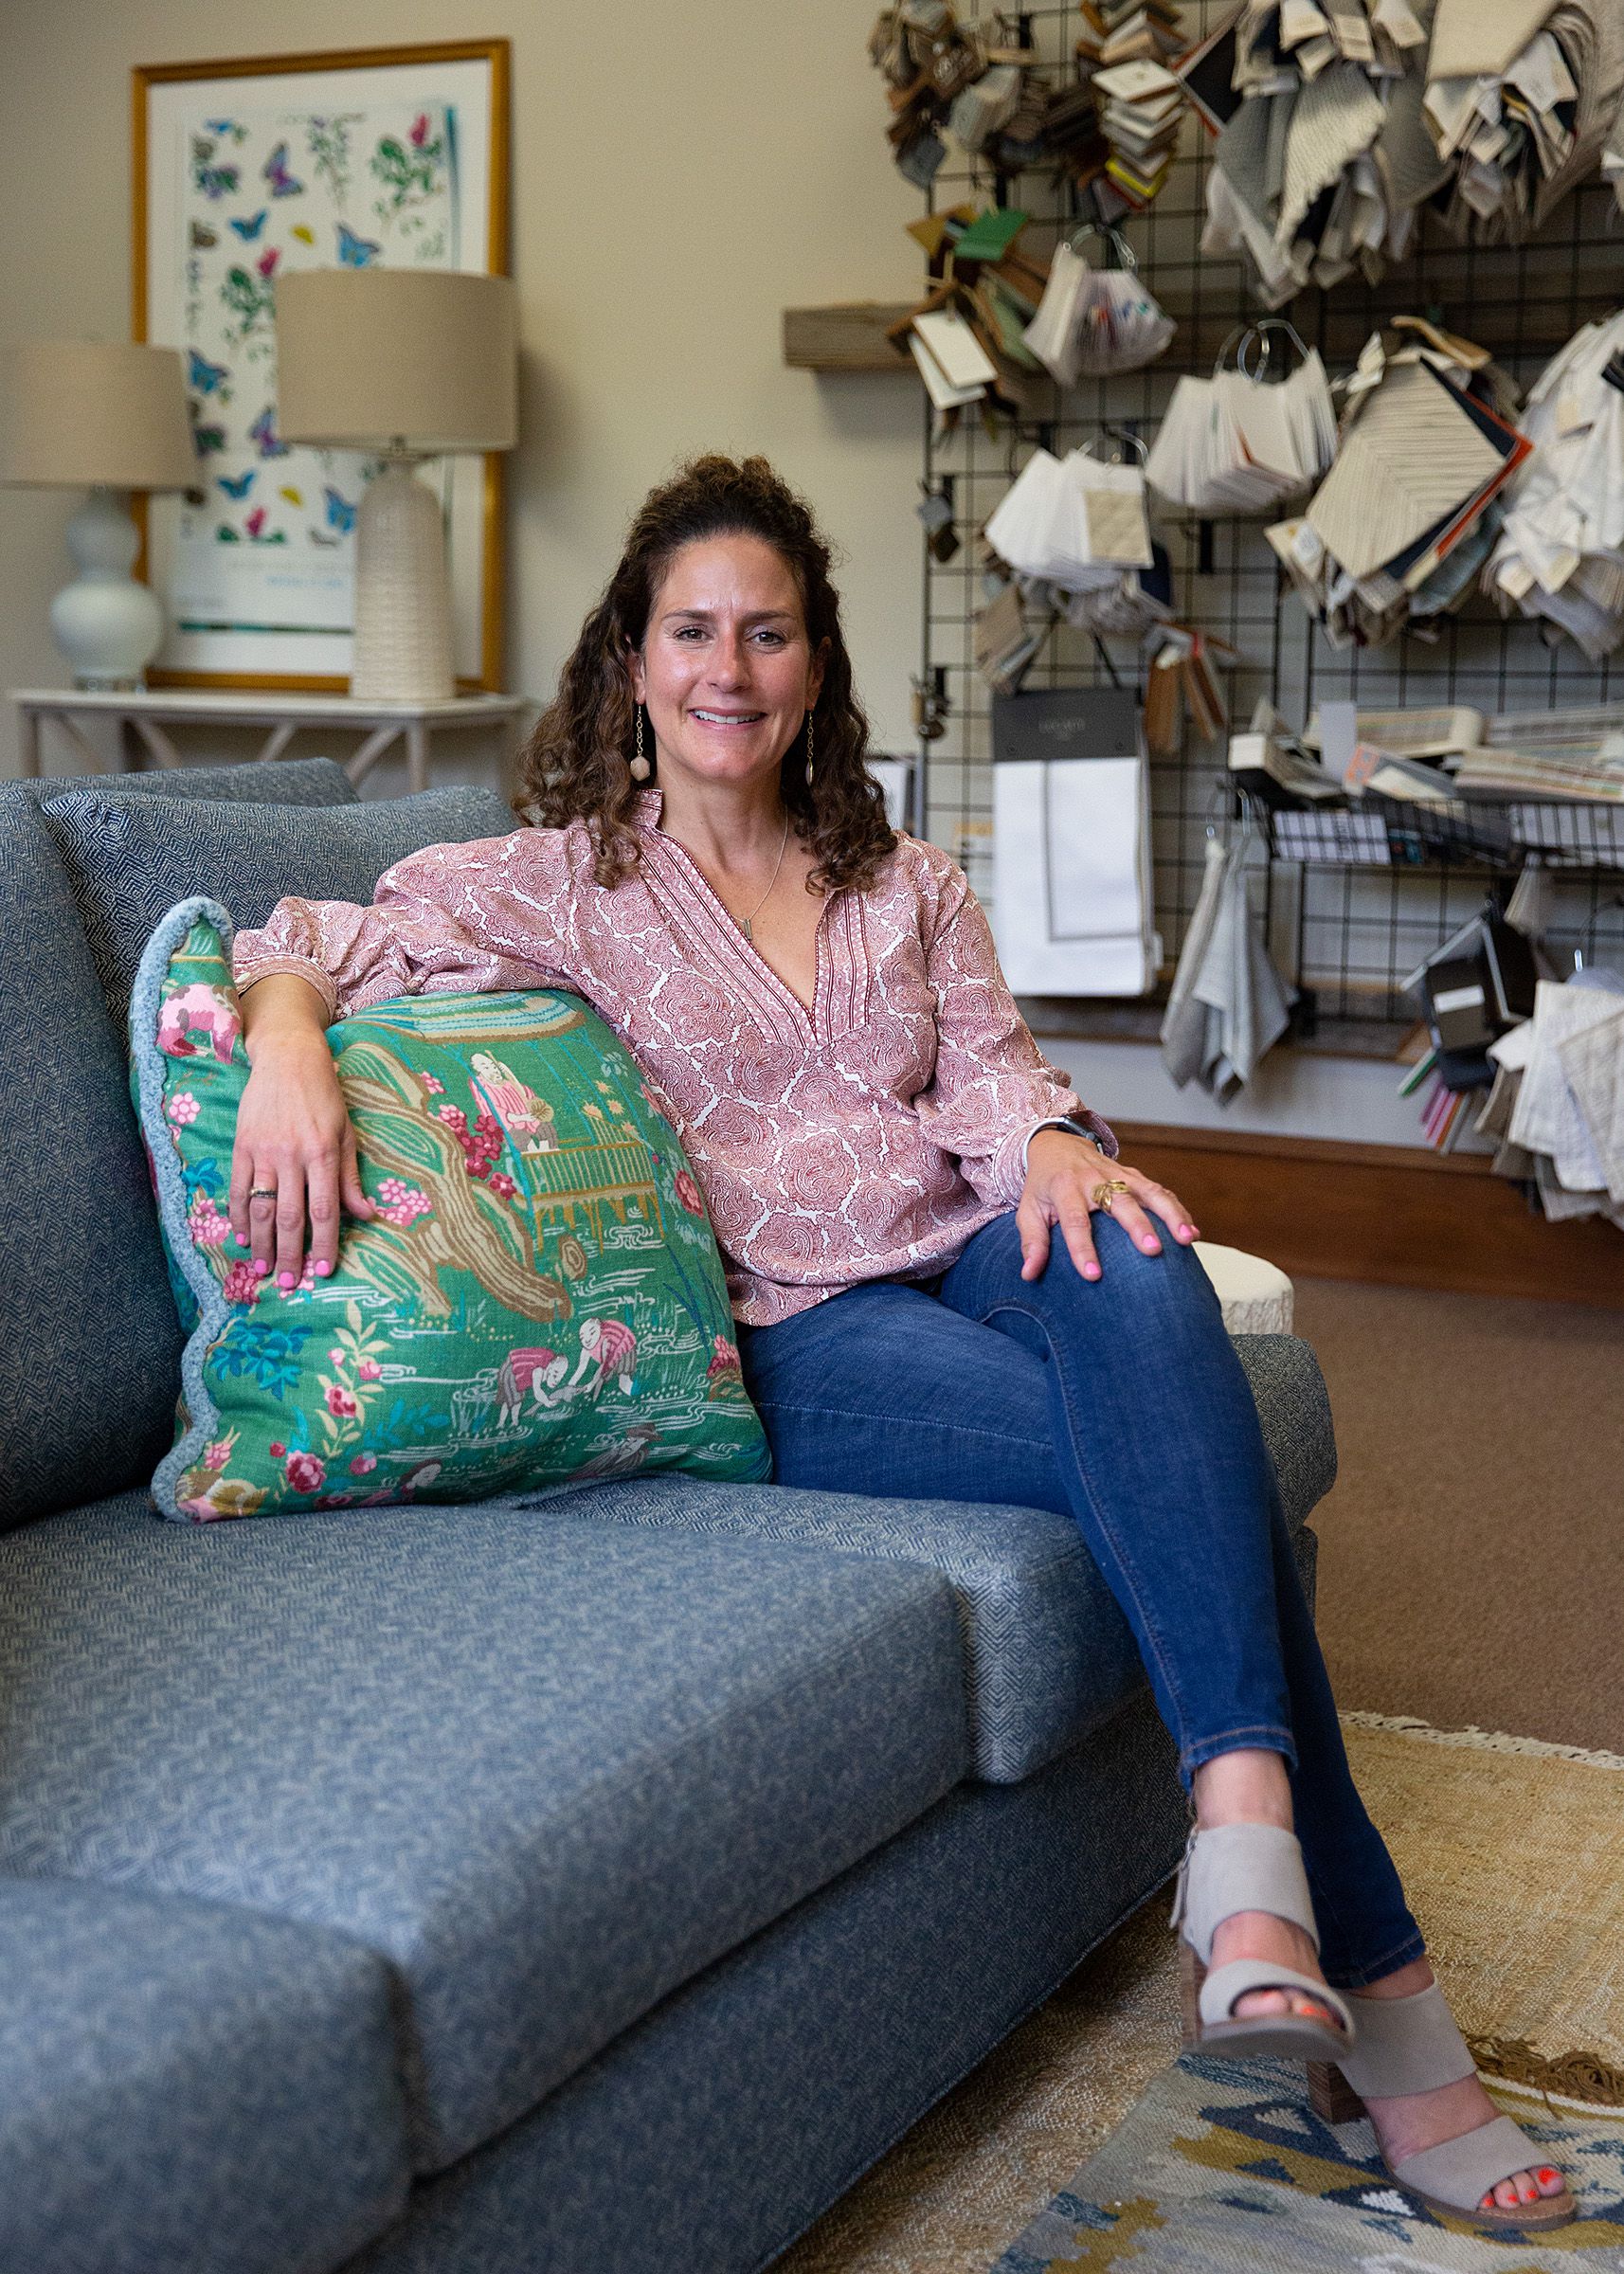 Interior designer Jessica Bell at her studio in Etna, N.H., on Tuesday, June 21, 2022. Bell previously worked as a nurse, and after taking time off to care for her children she decided to return to work and focus on her passion for design. (Valley News / Report For America - Alex Driehaus) Copyright Valley News. May not be reprinted or used online without permission. Send requests to permission@vnews.com.